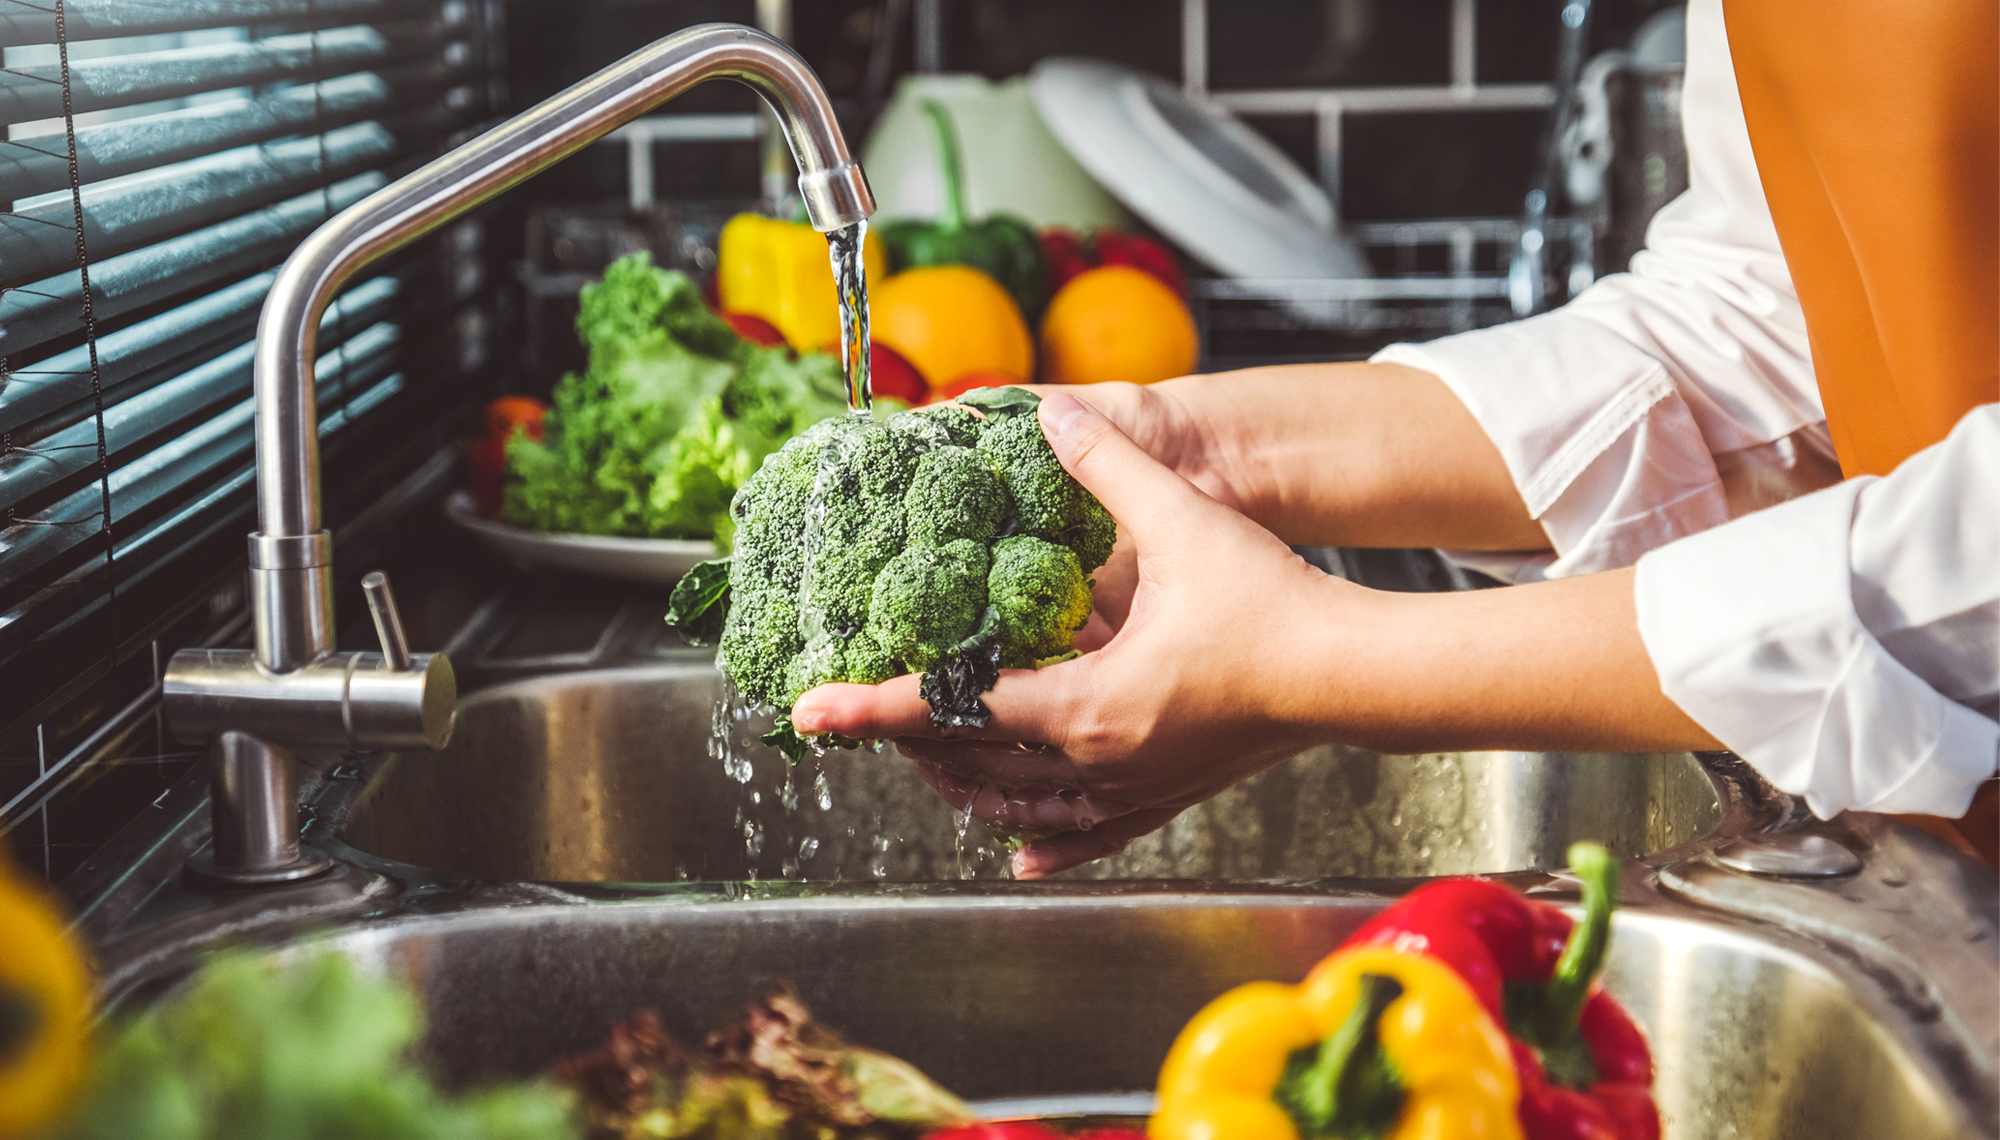 Person washing fresh vegetables and fruits in kitchen sink